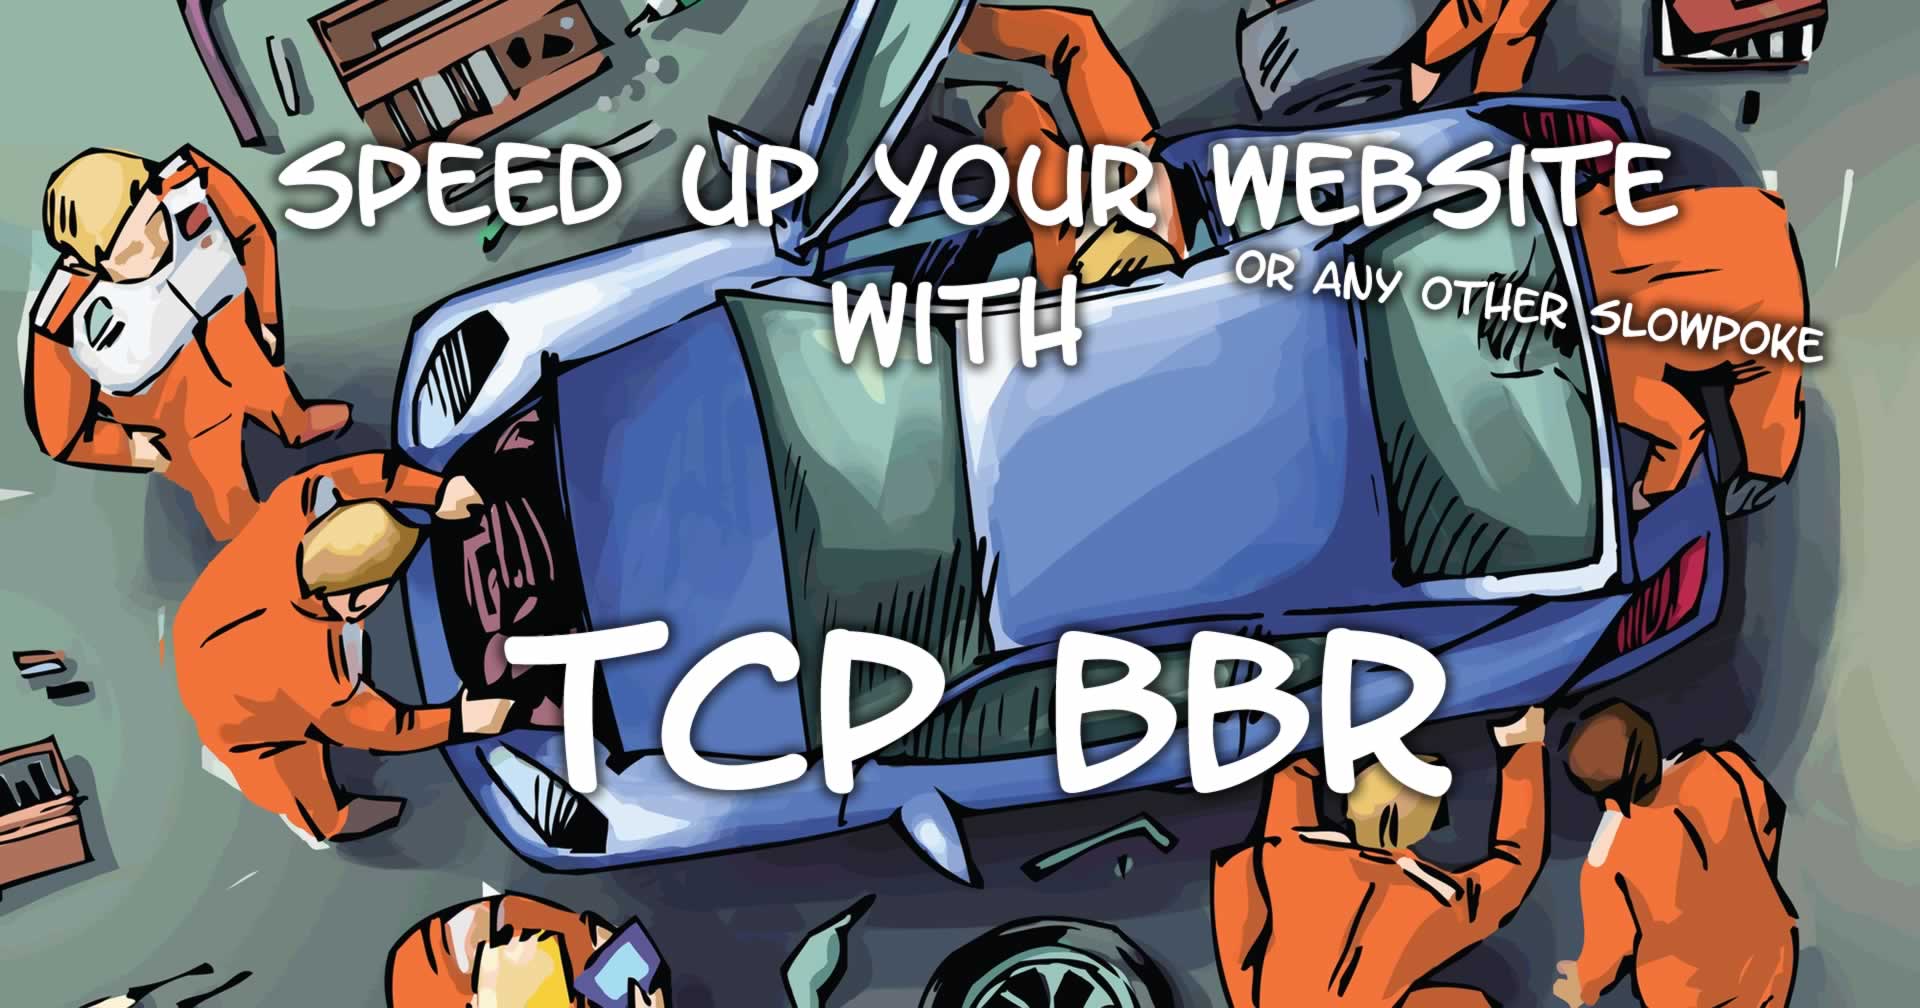 Speed up your website with TCP BBR